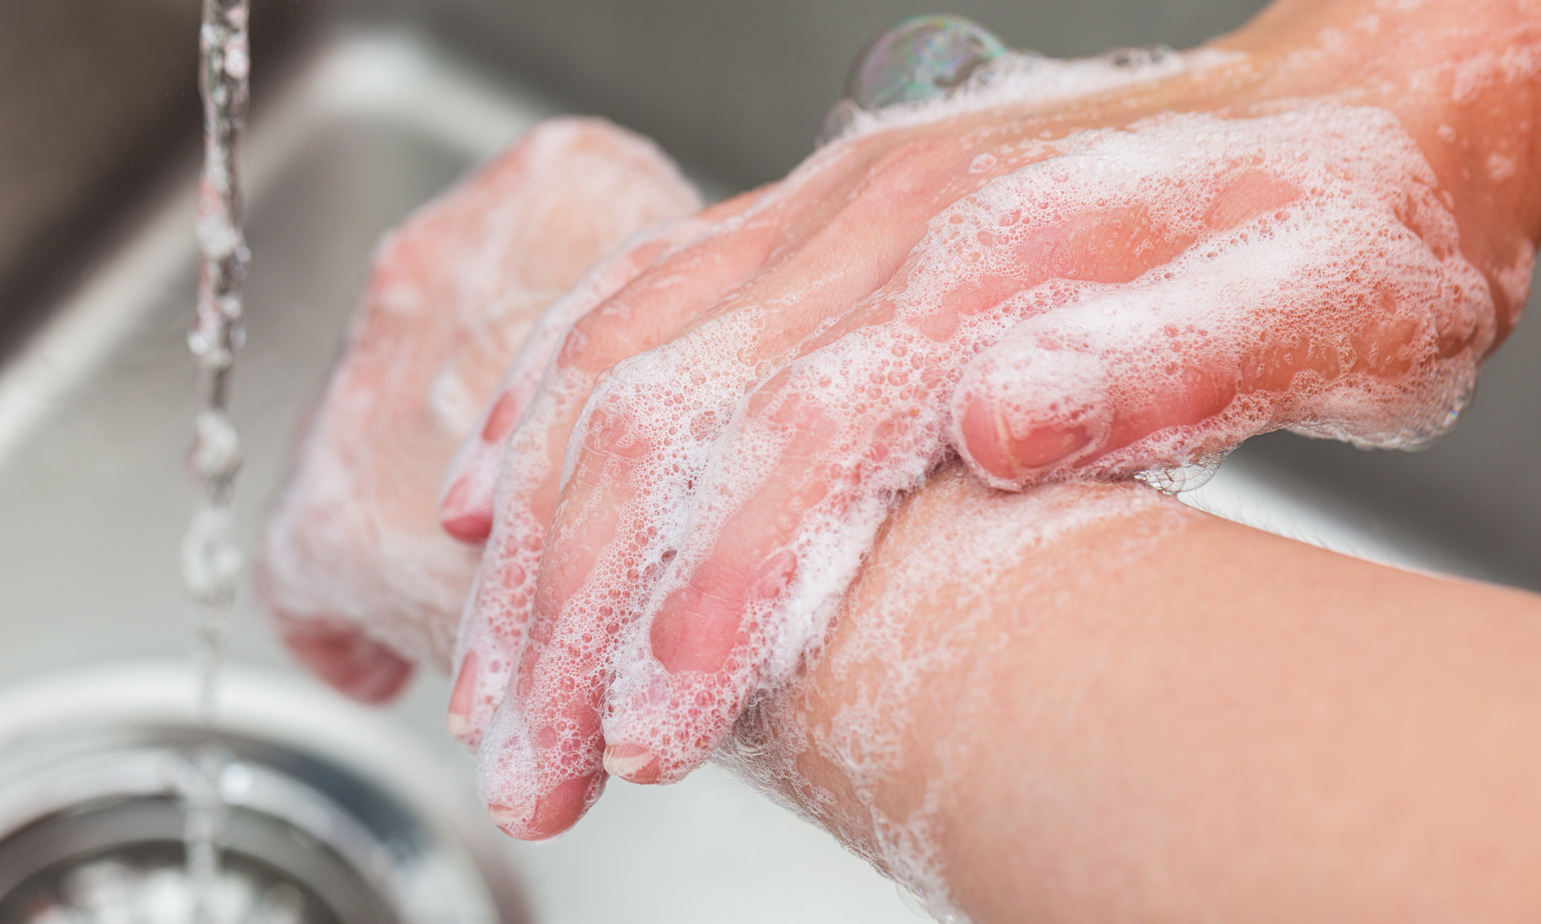 Soapy hands under faucet, scrubbing clean